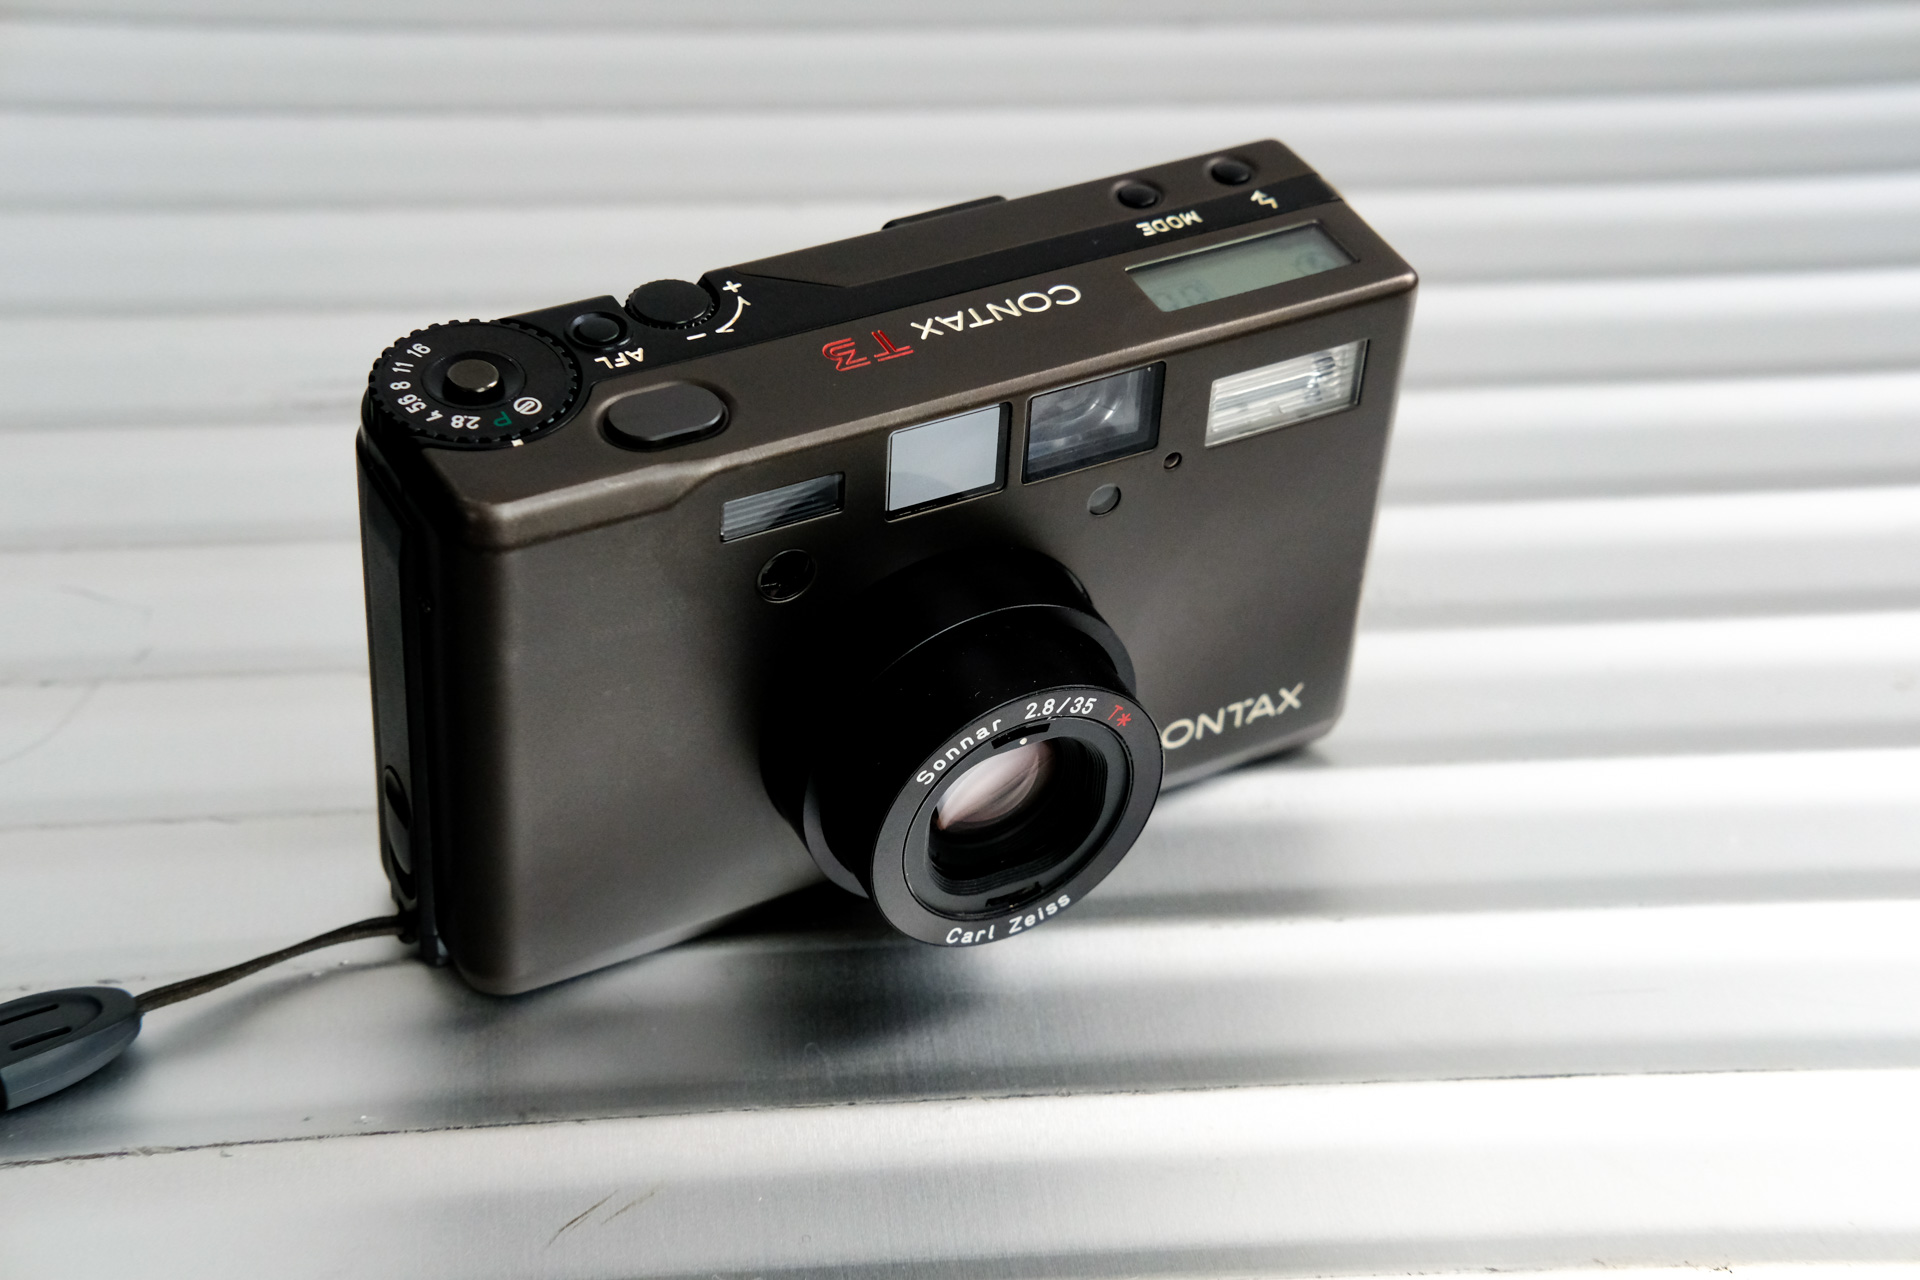 Contax T3 Film Camera - a compact little beauty with spunk